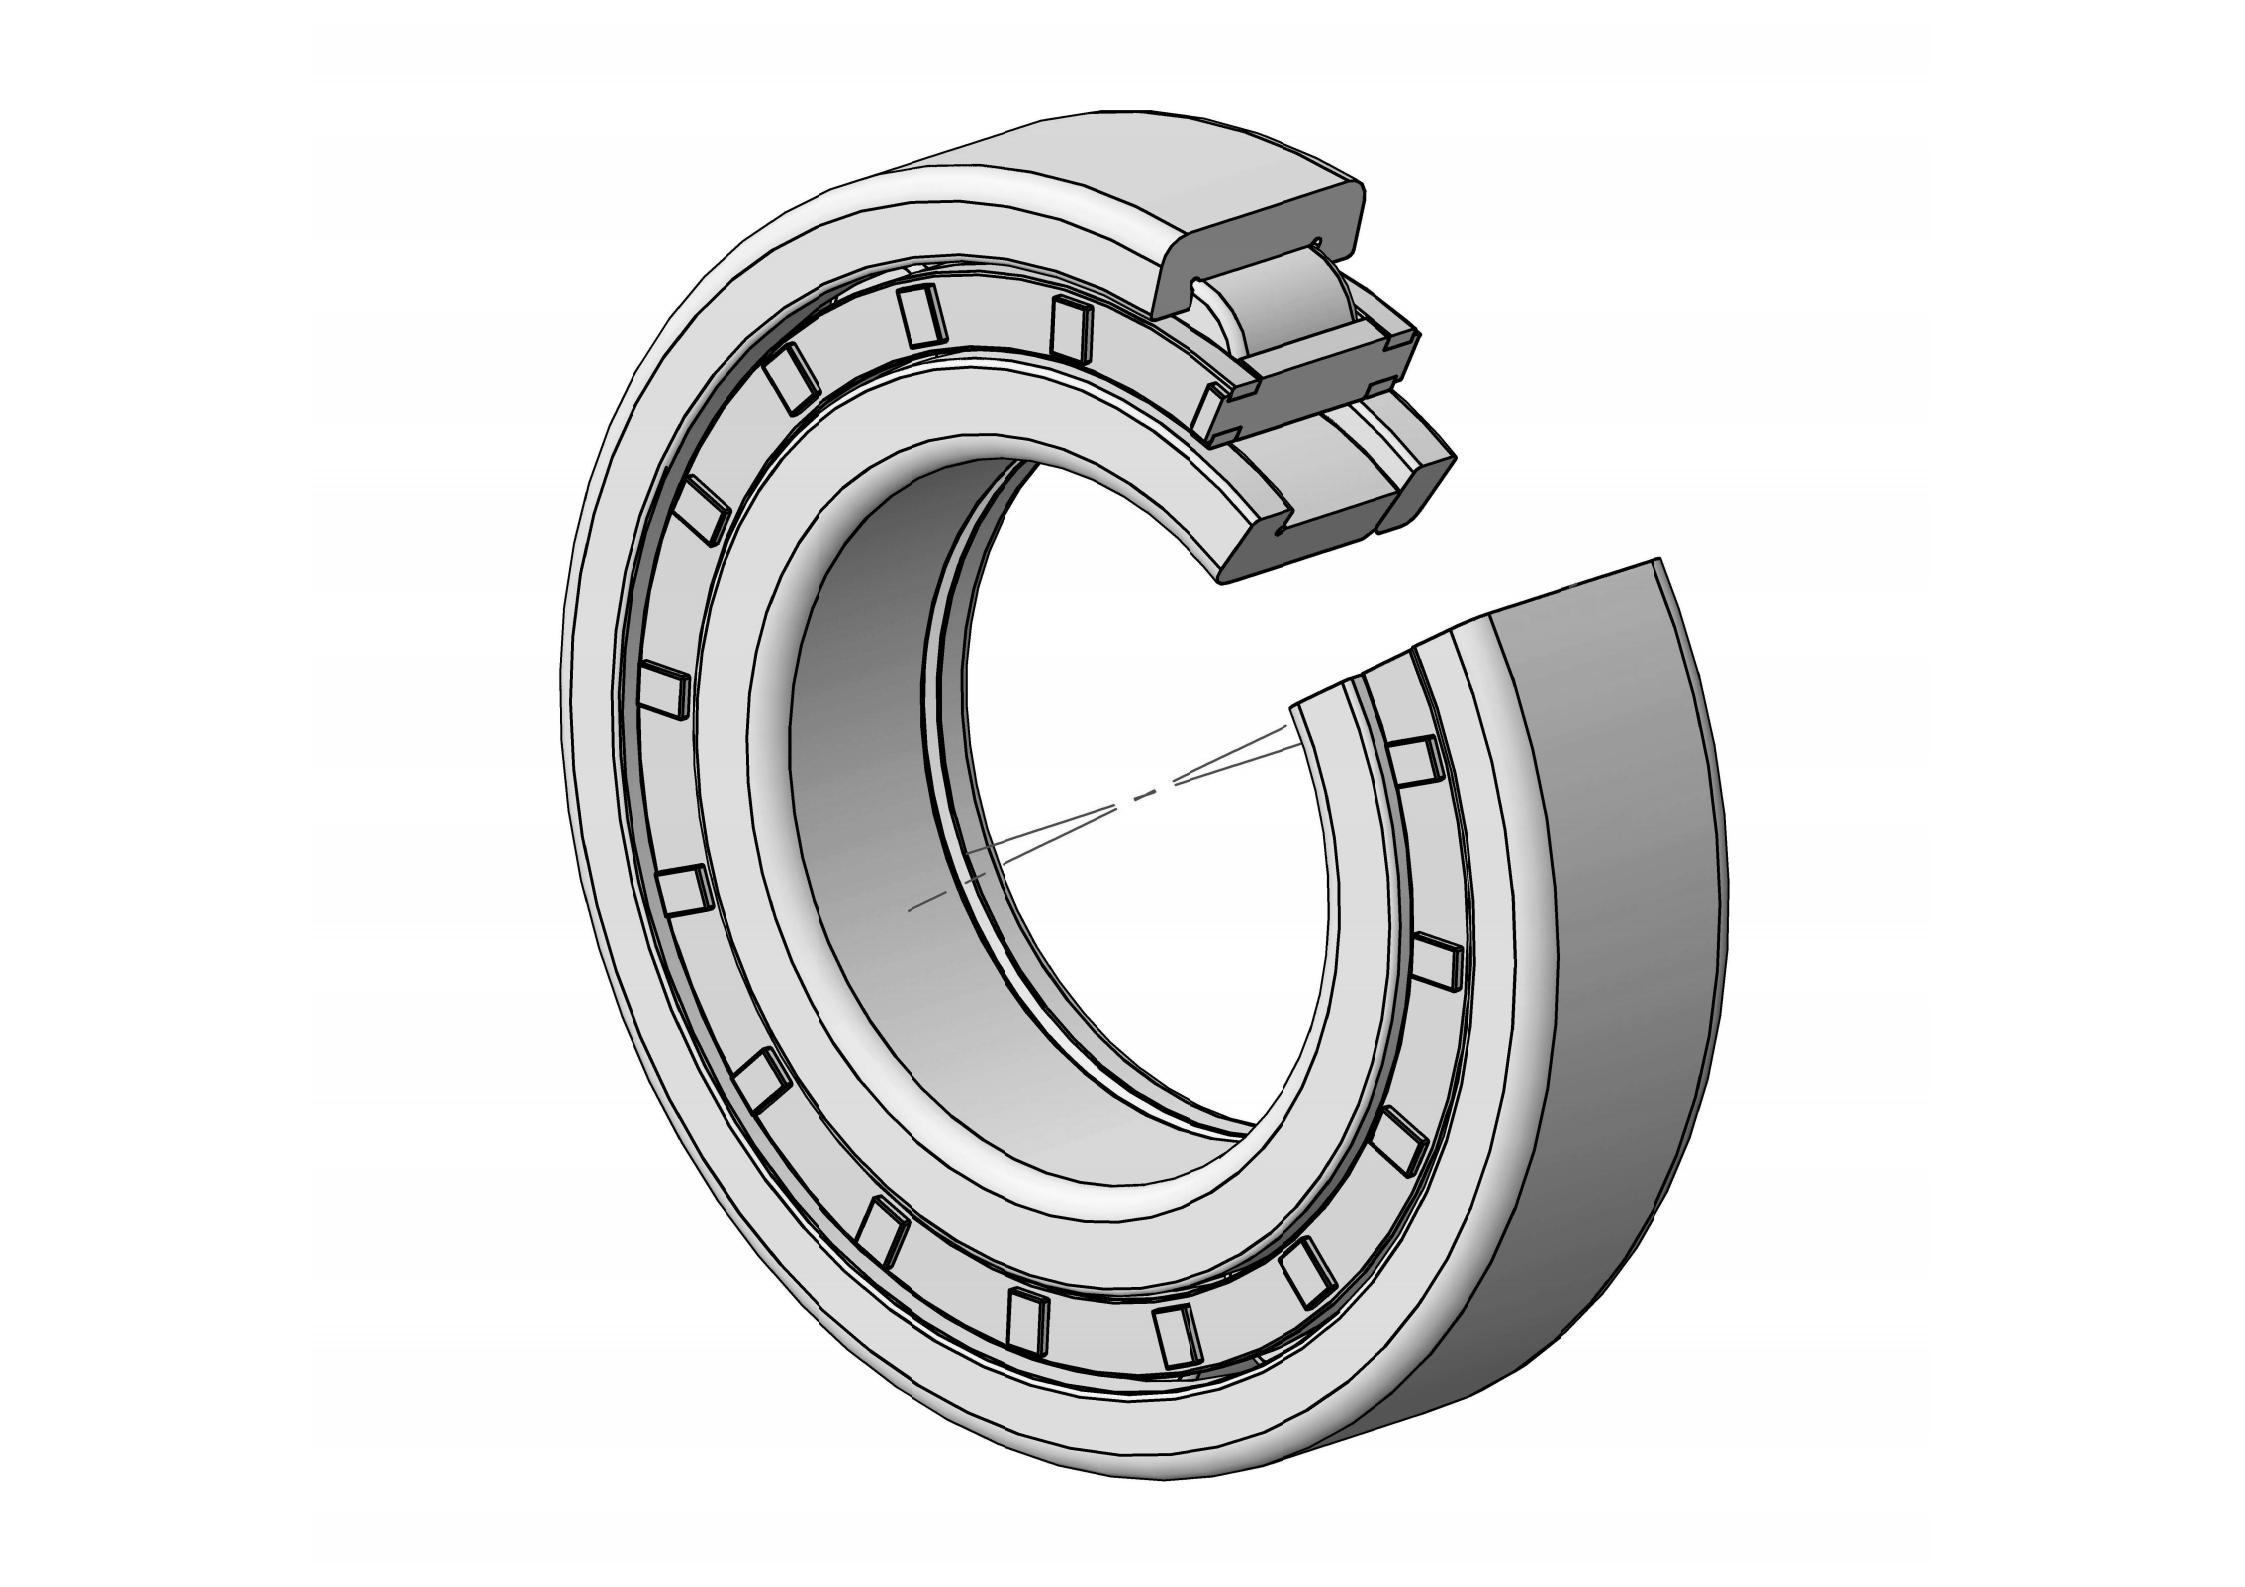  NUP2213-E Single Row Cylindrical roller bearing 